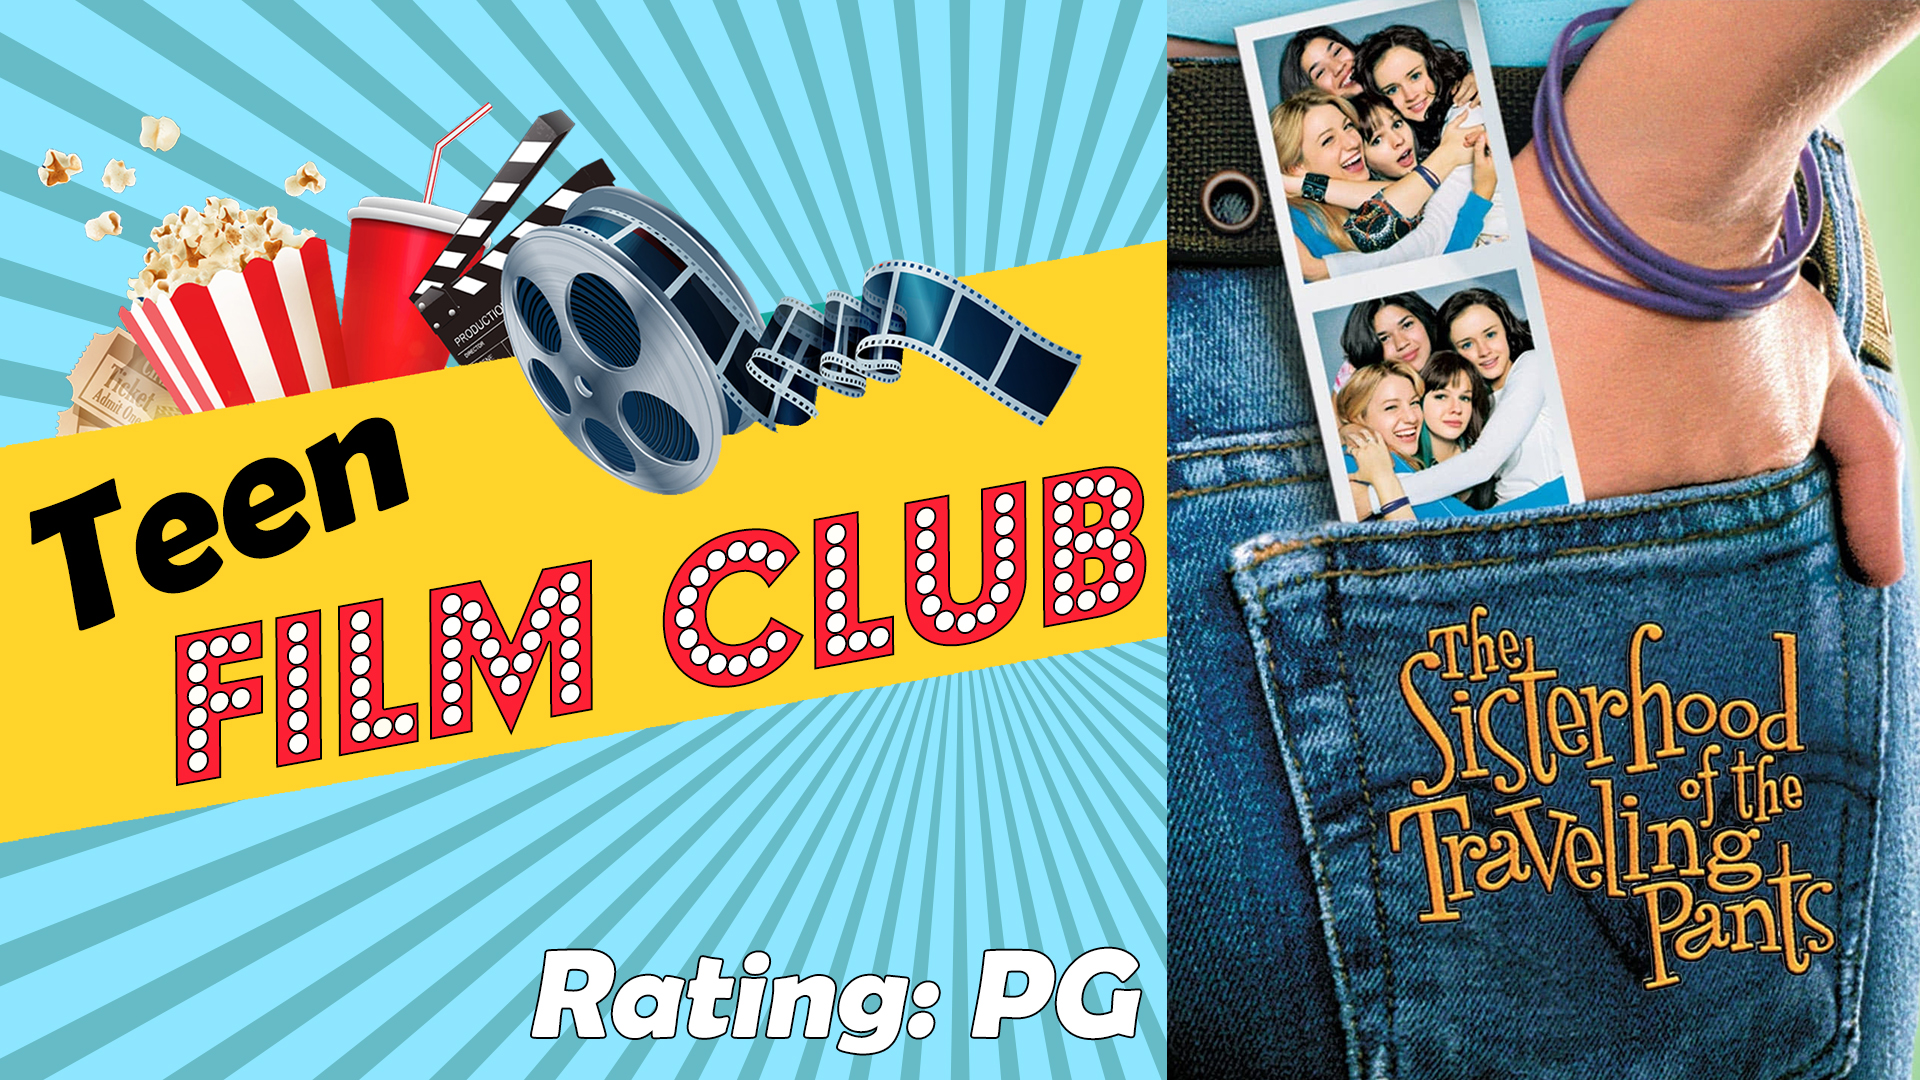 Image reads "Teen Film Club" against a gold banner on a blue sunburst background. A movie reel, cup, popcorn container, and tickets are on the top of the banner. A popcorn bucket with tickets in the bucket are in the bottom right corner. The movie poster for "Sisterhood of the Traveling Pants" is to the right of the title.